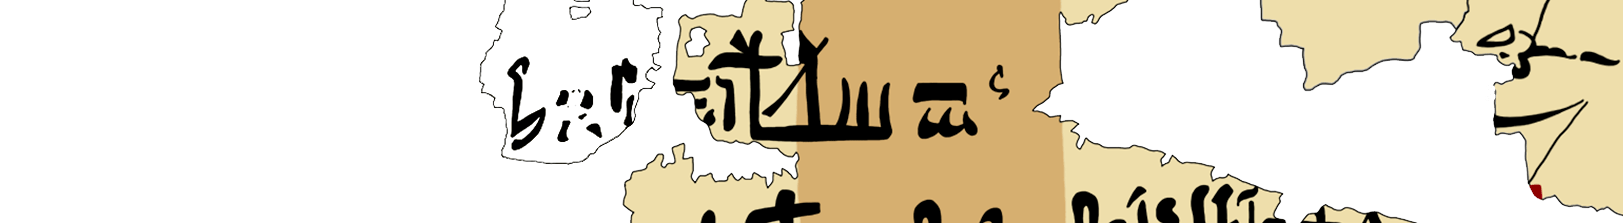 facsimile of the hieratic text